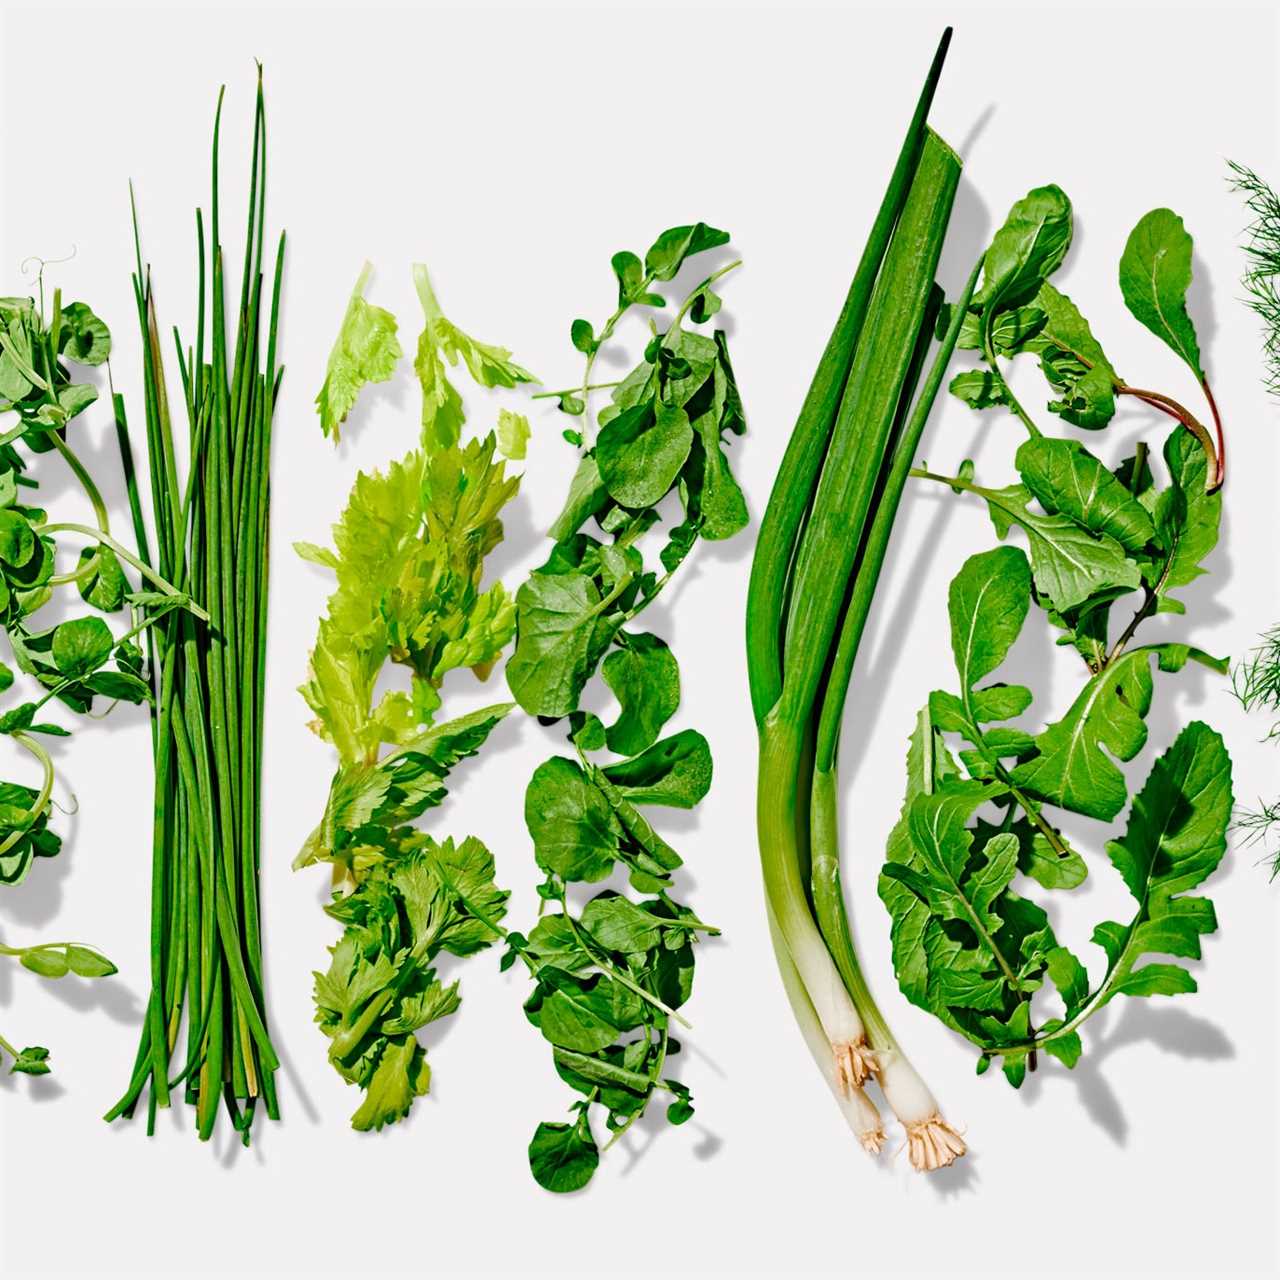 Cooking With Herbs For a Diabetic Diet